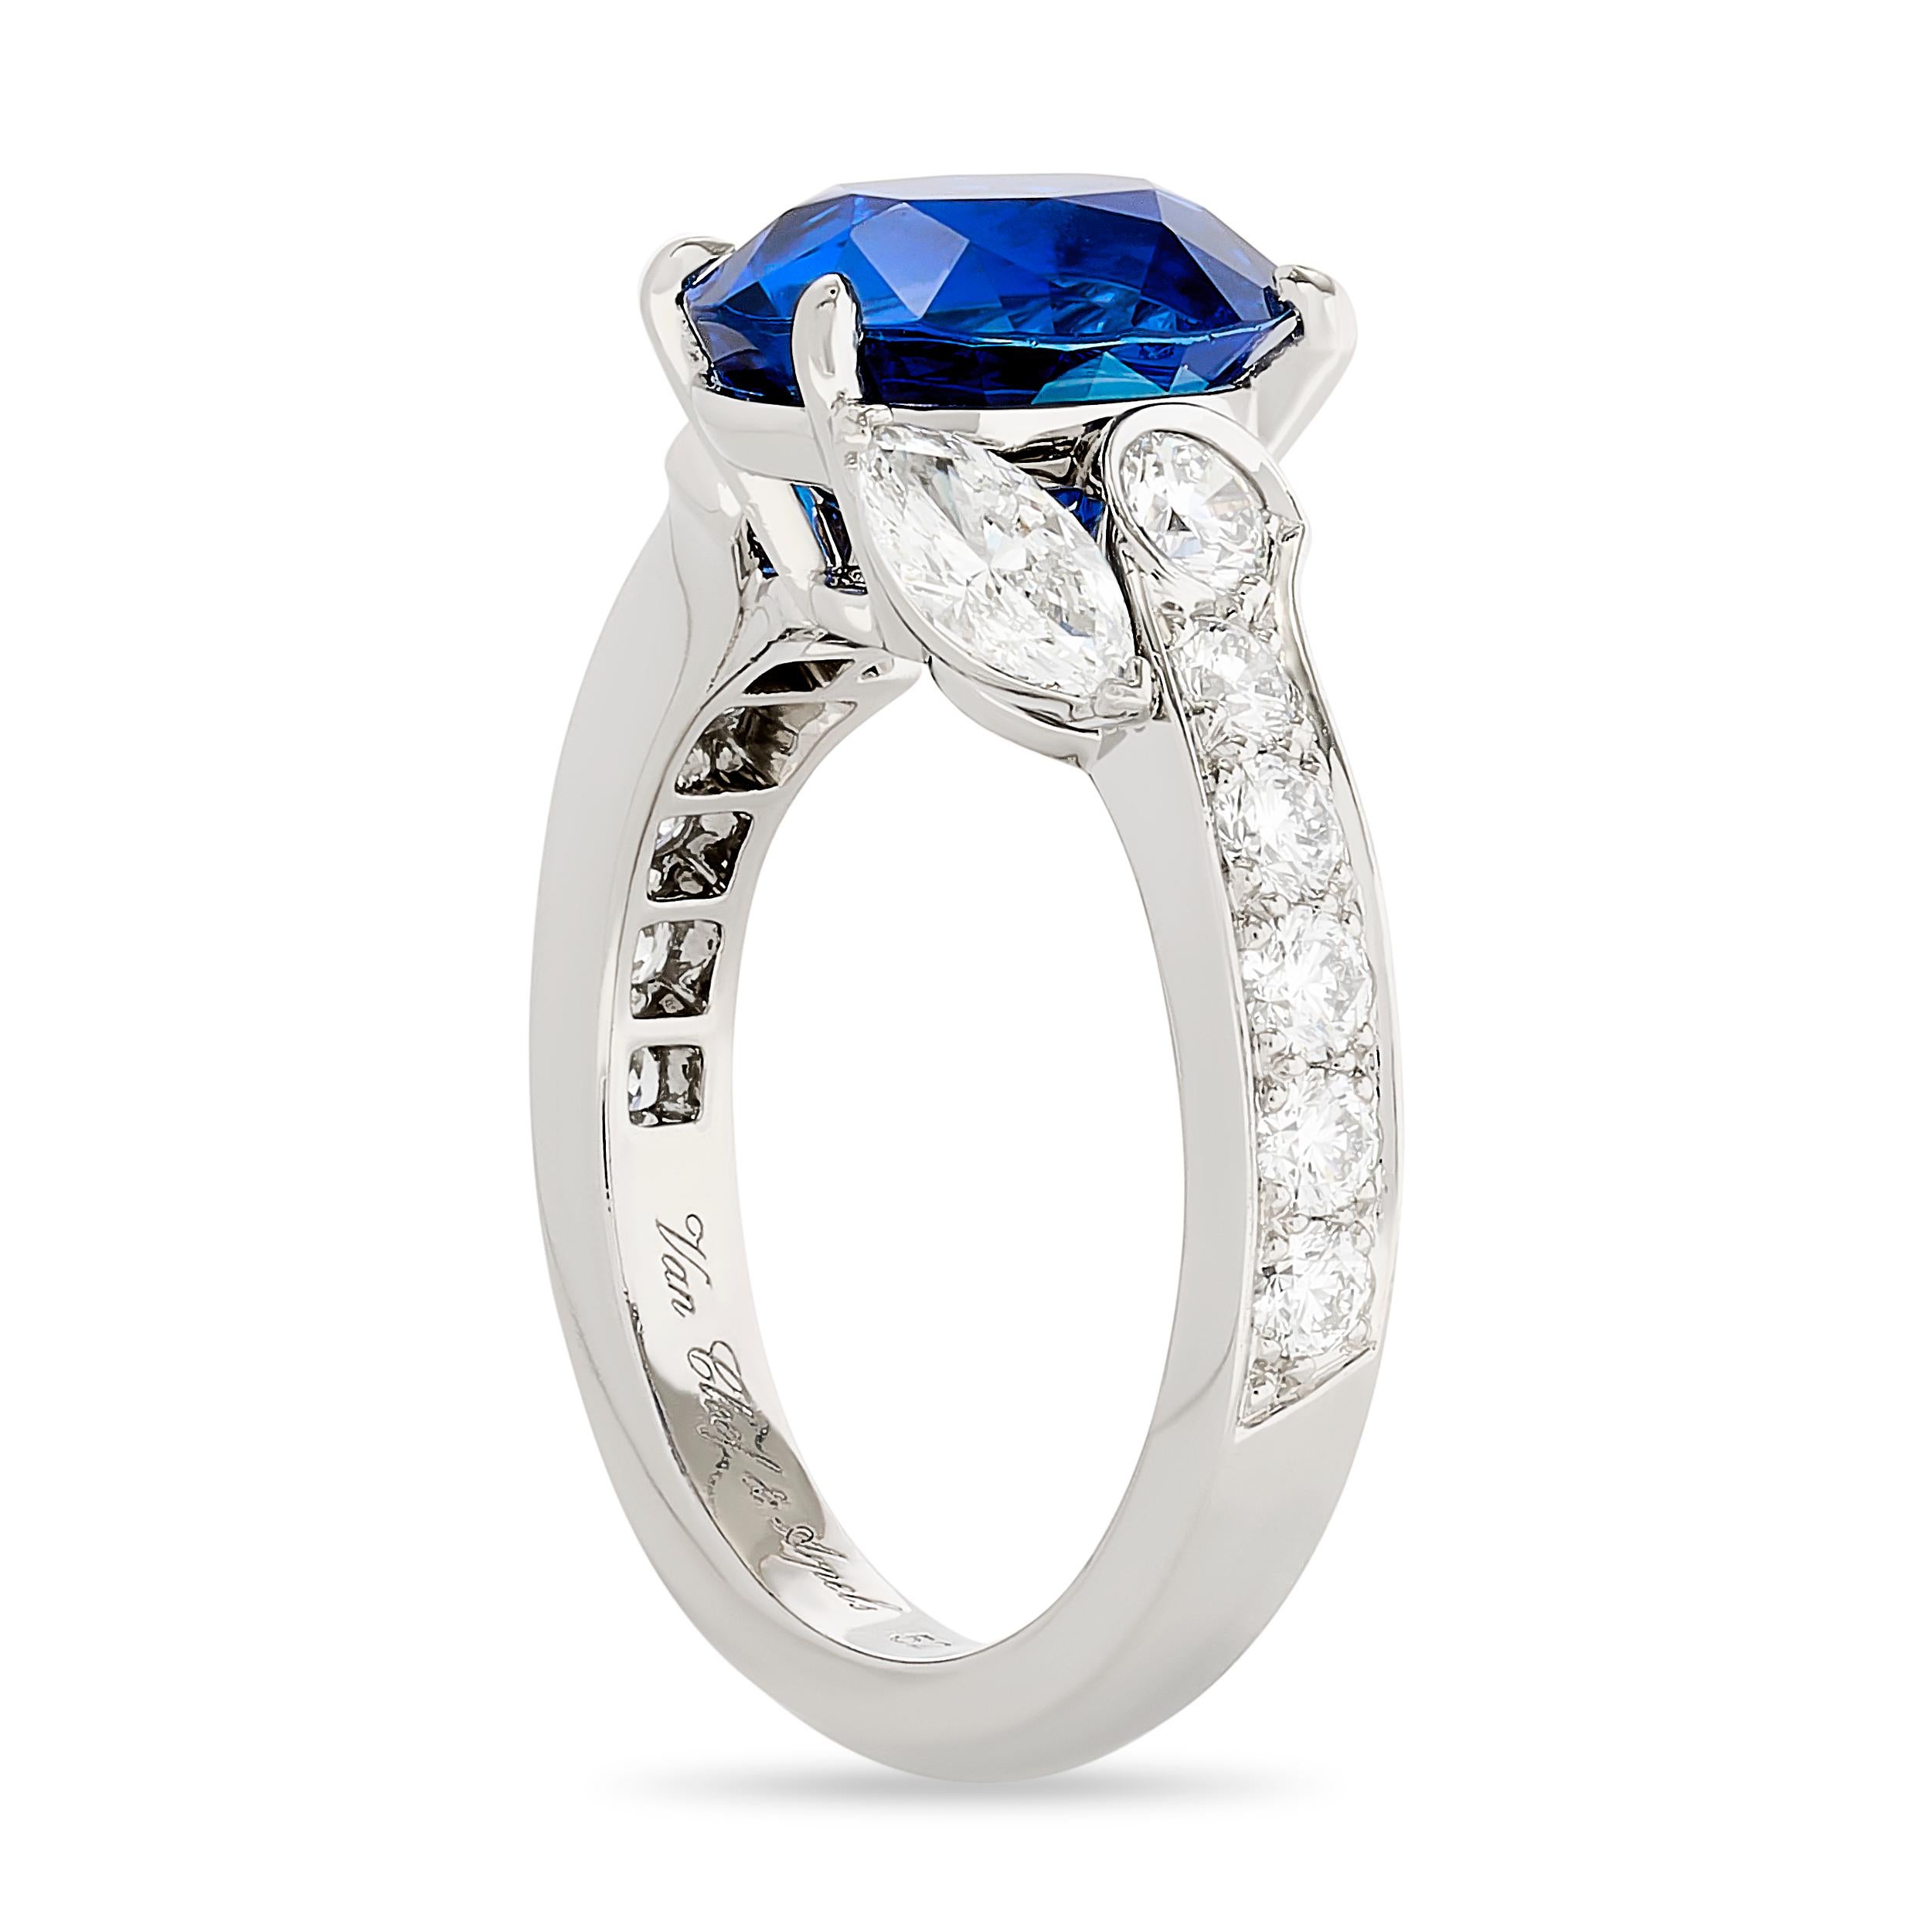 Behold the beauty of this Van Cleef and Arpels sapphire and diamond bypass ring, where sophistication intertwines with brilliance.

The oval sapphire weighs approximately 3.89 carat. The 2 marquise and 13 round diamonds weigh a total of 1.20 carat,